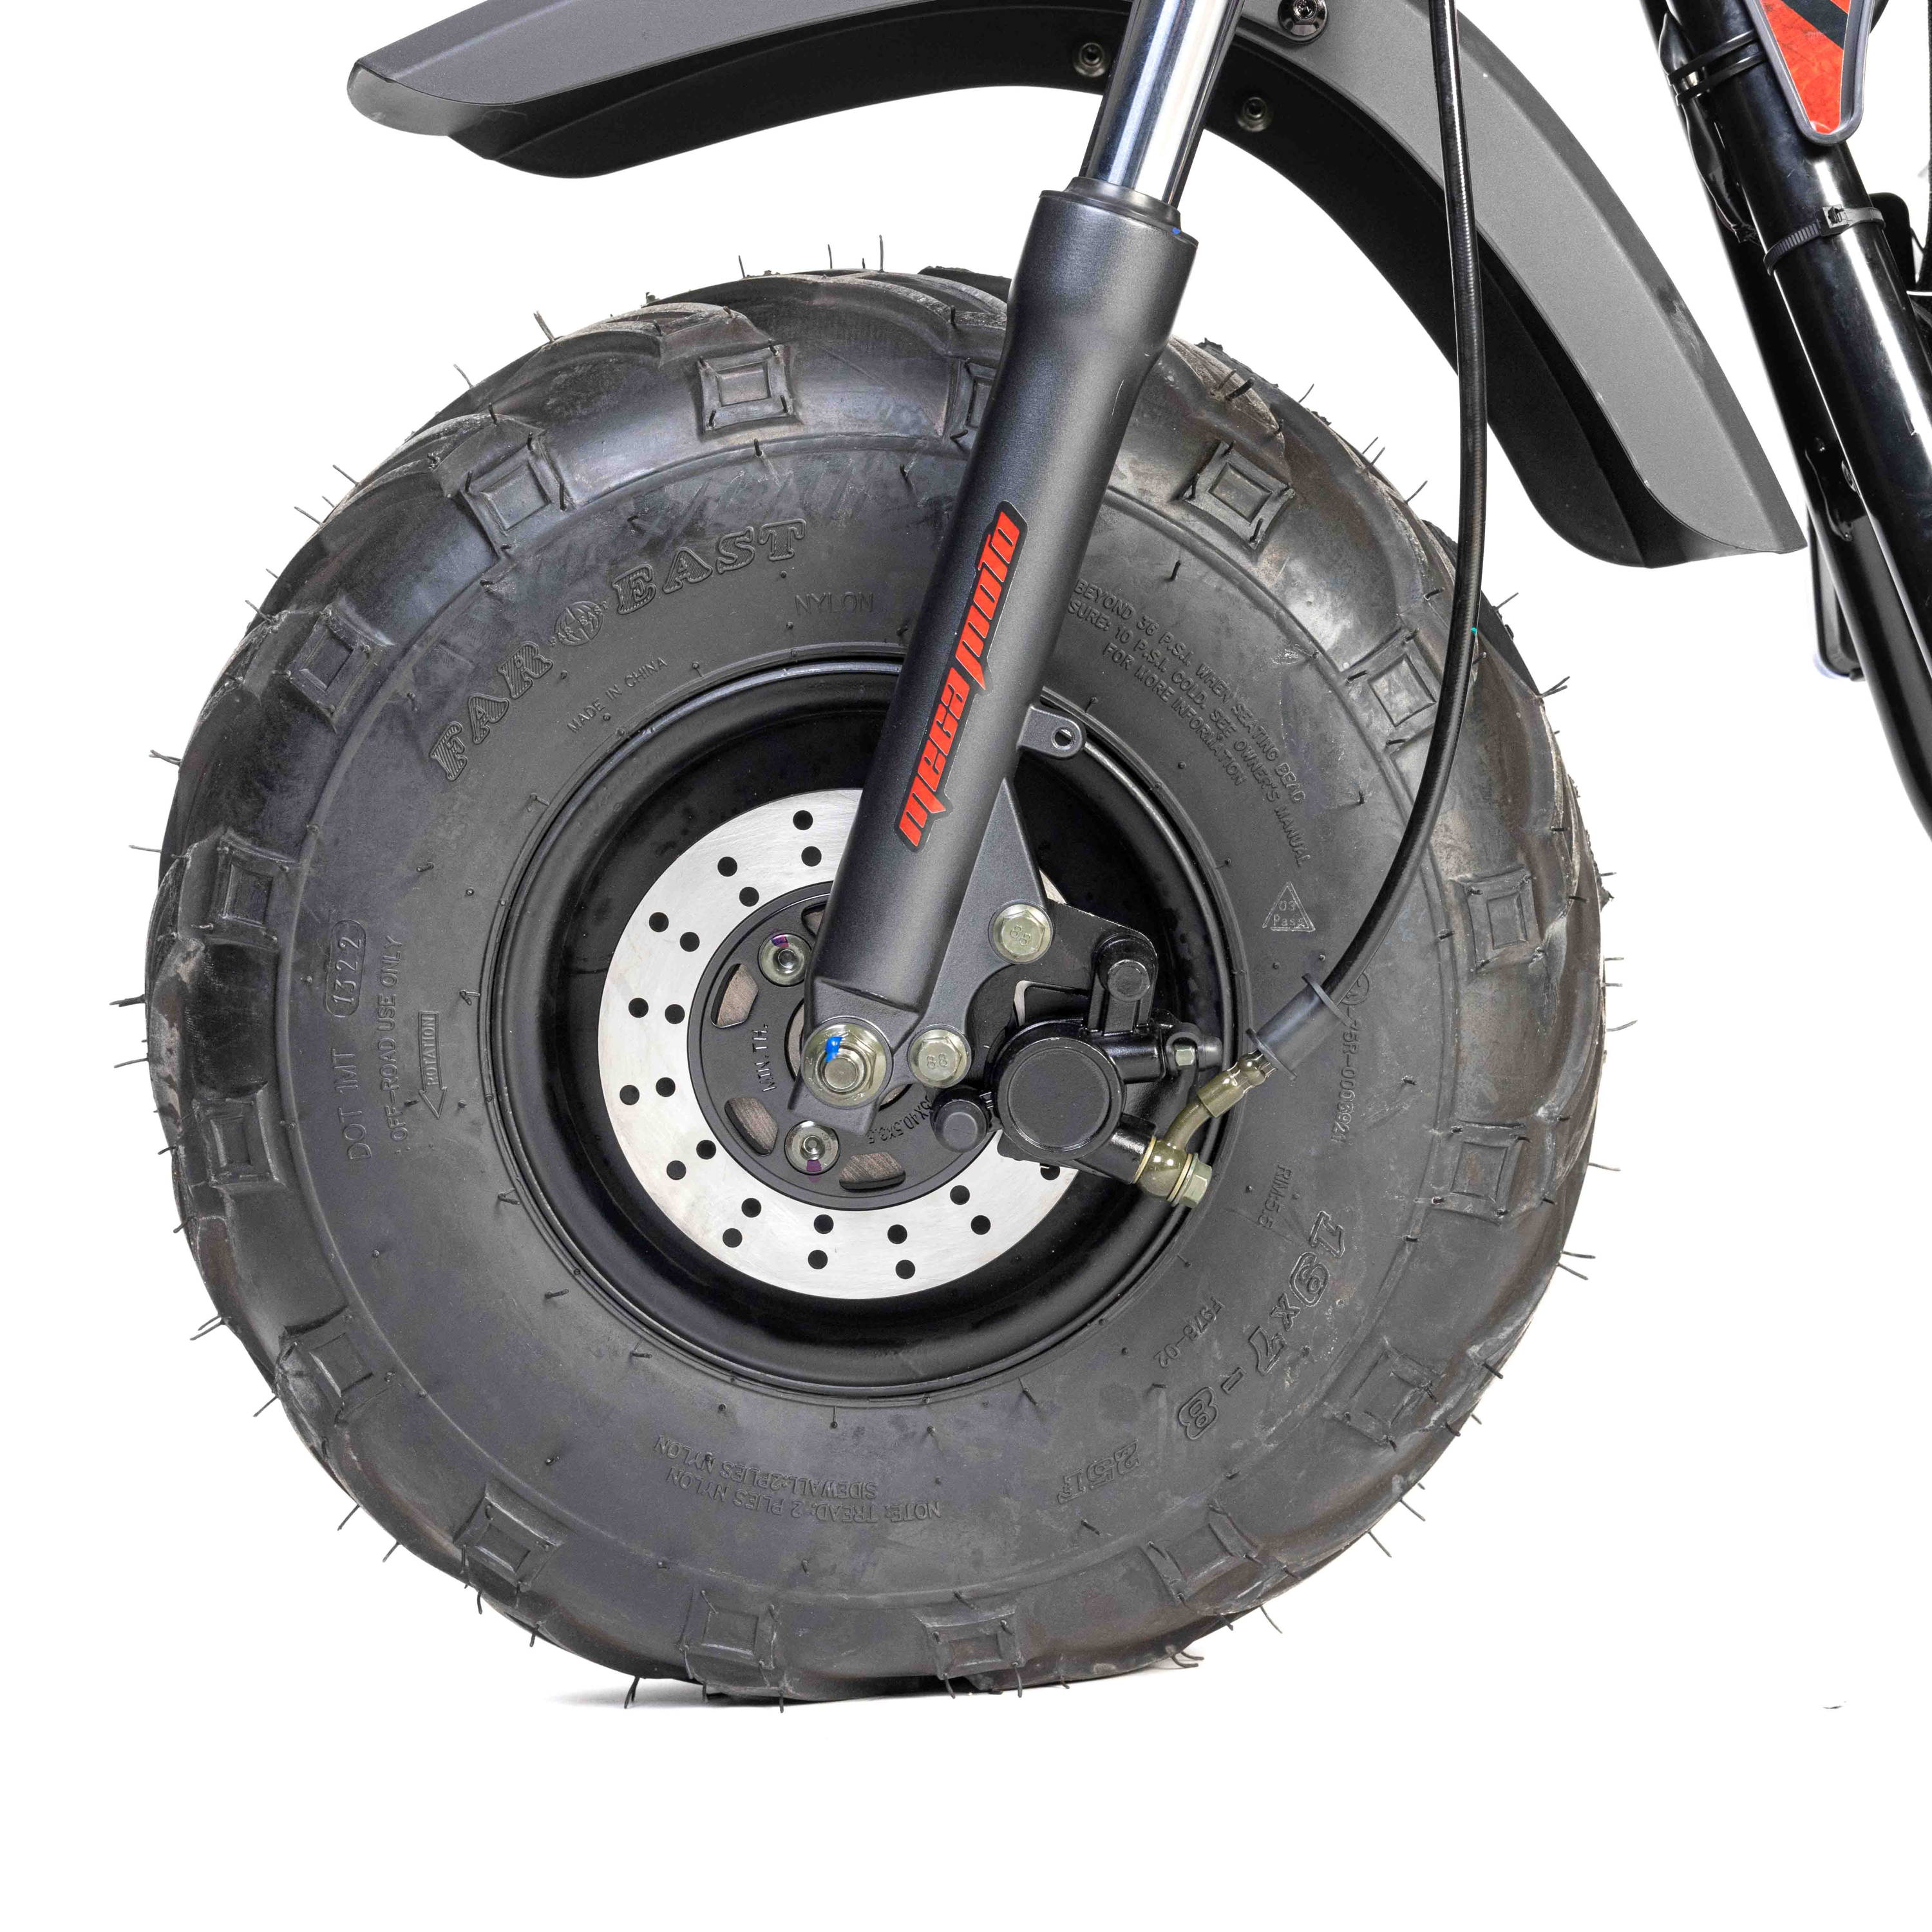 Megalodon front hydraulic brake and front tire